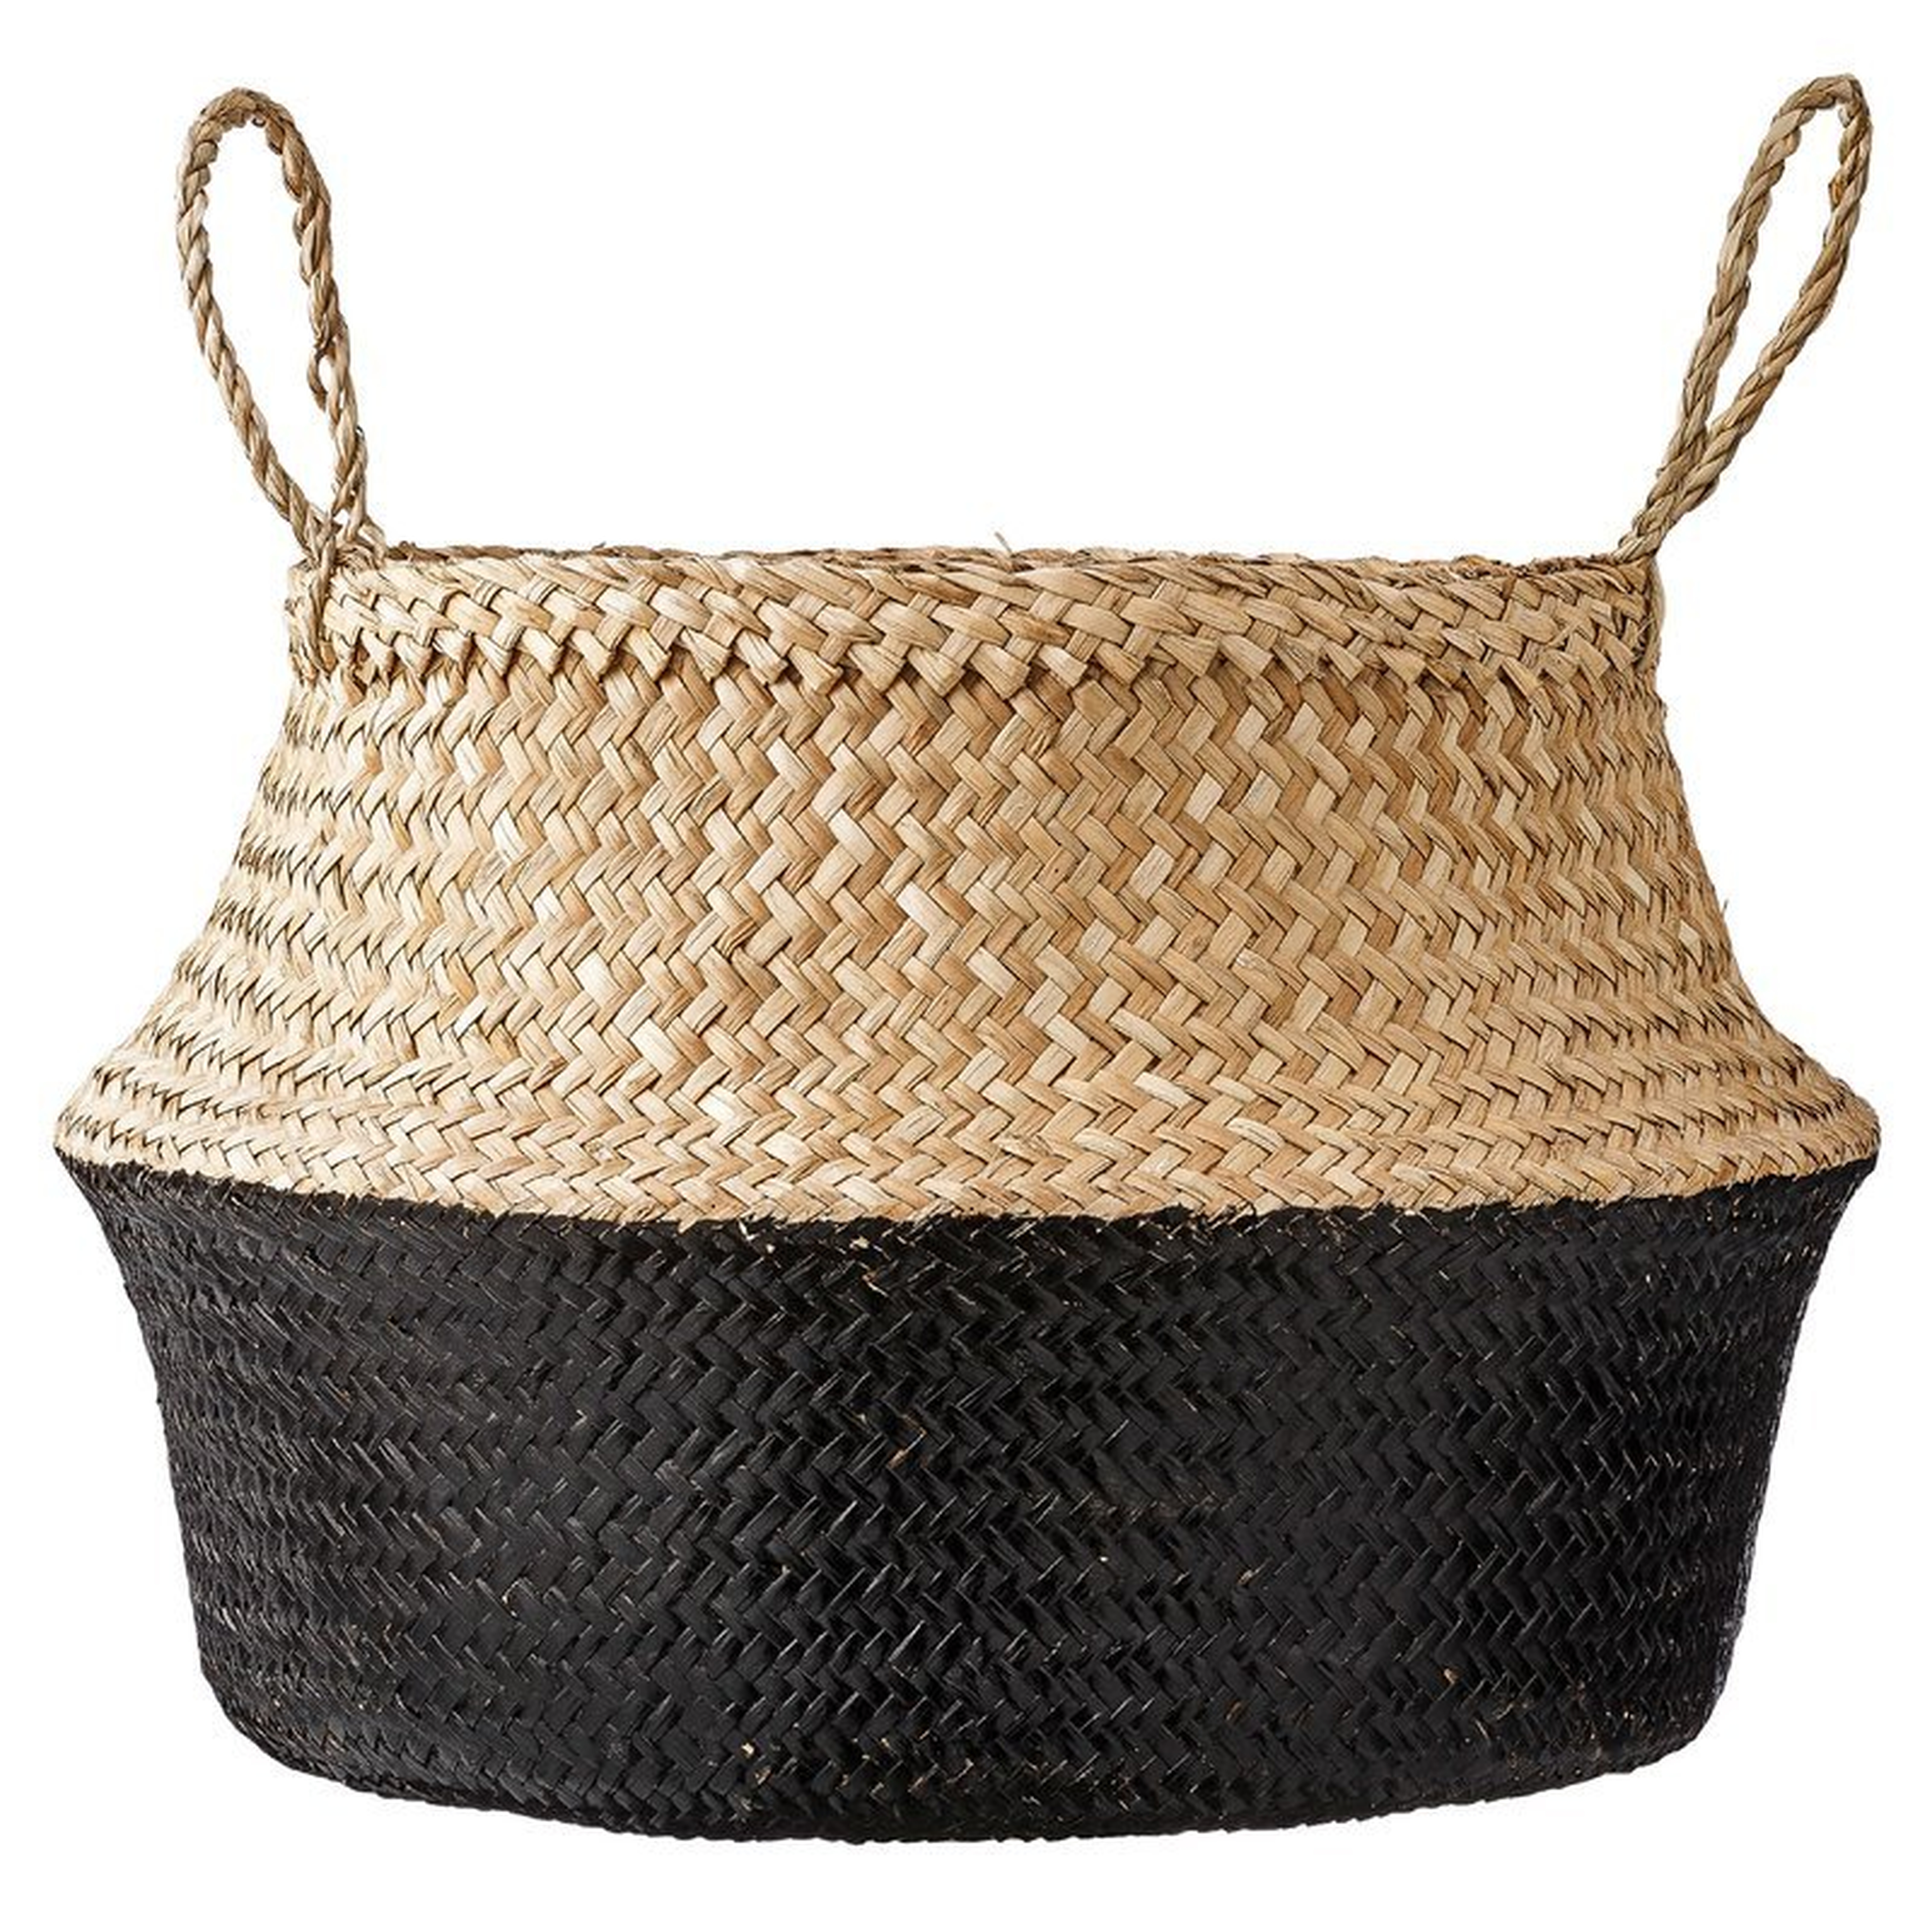 Traditional Seagrass Basket with Handles - Black/Natural - AllModern